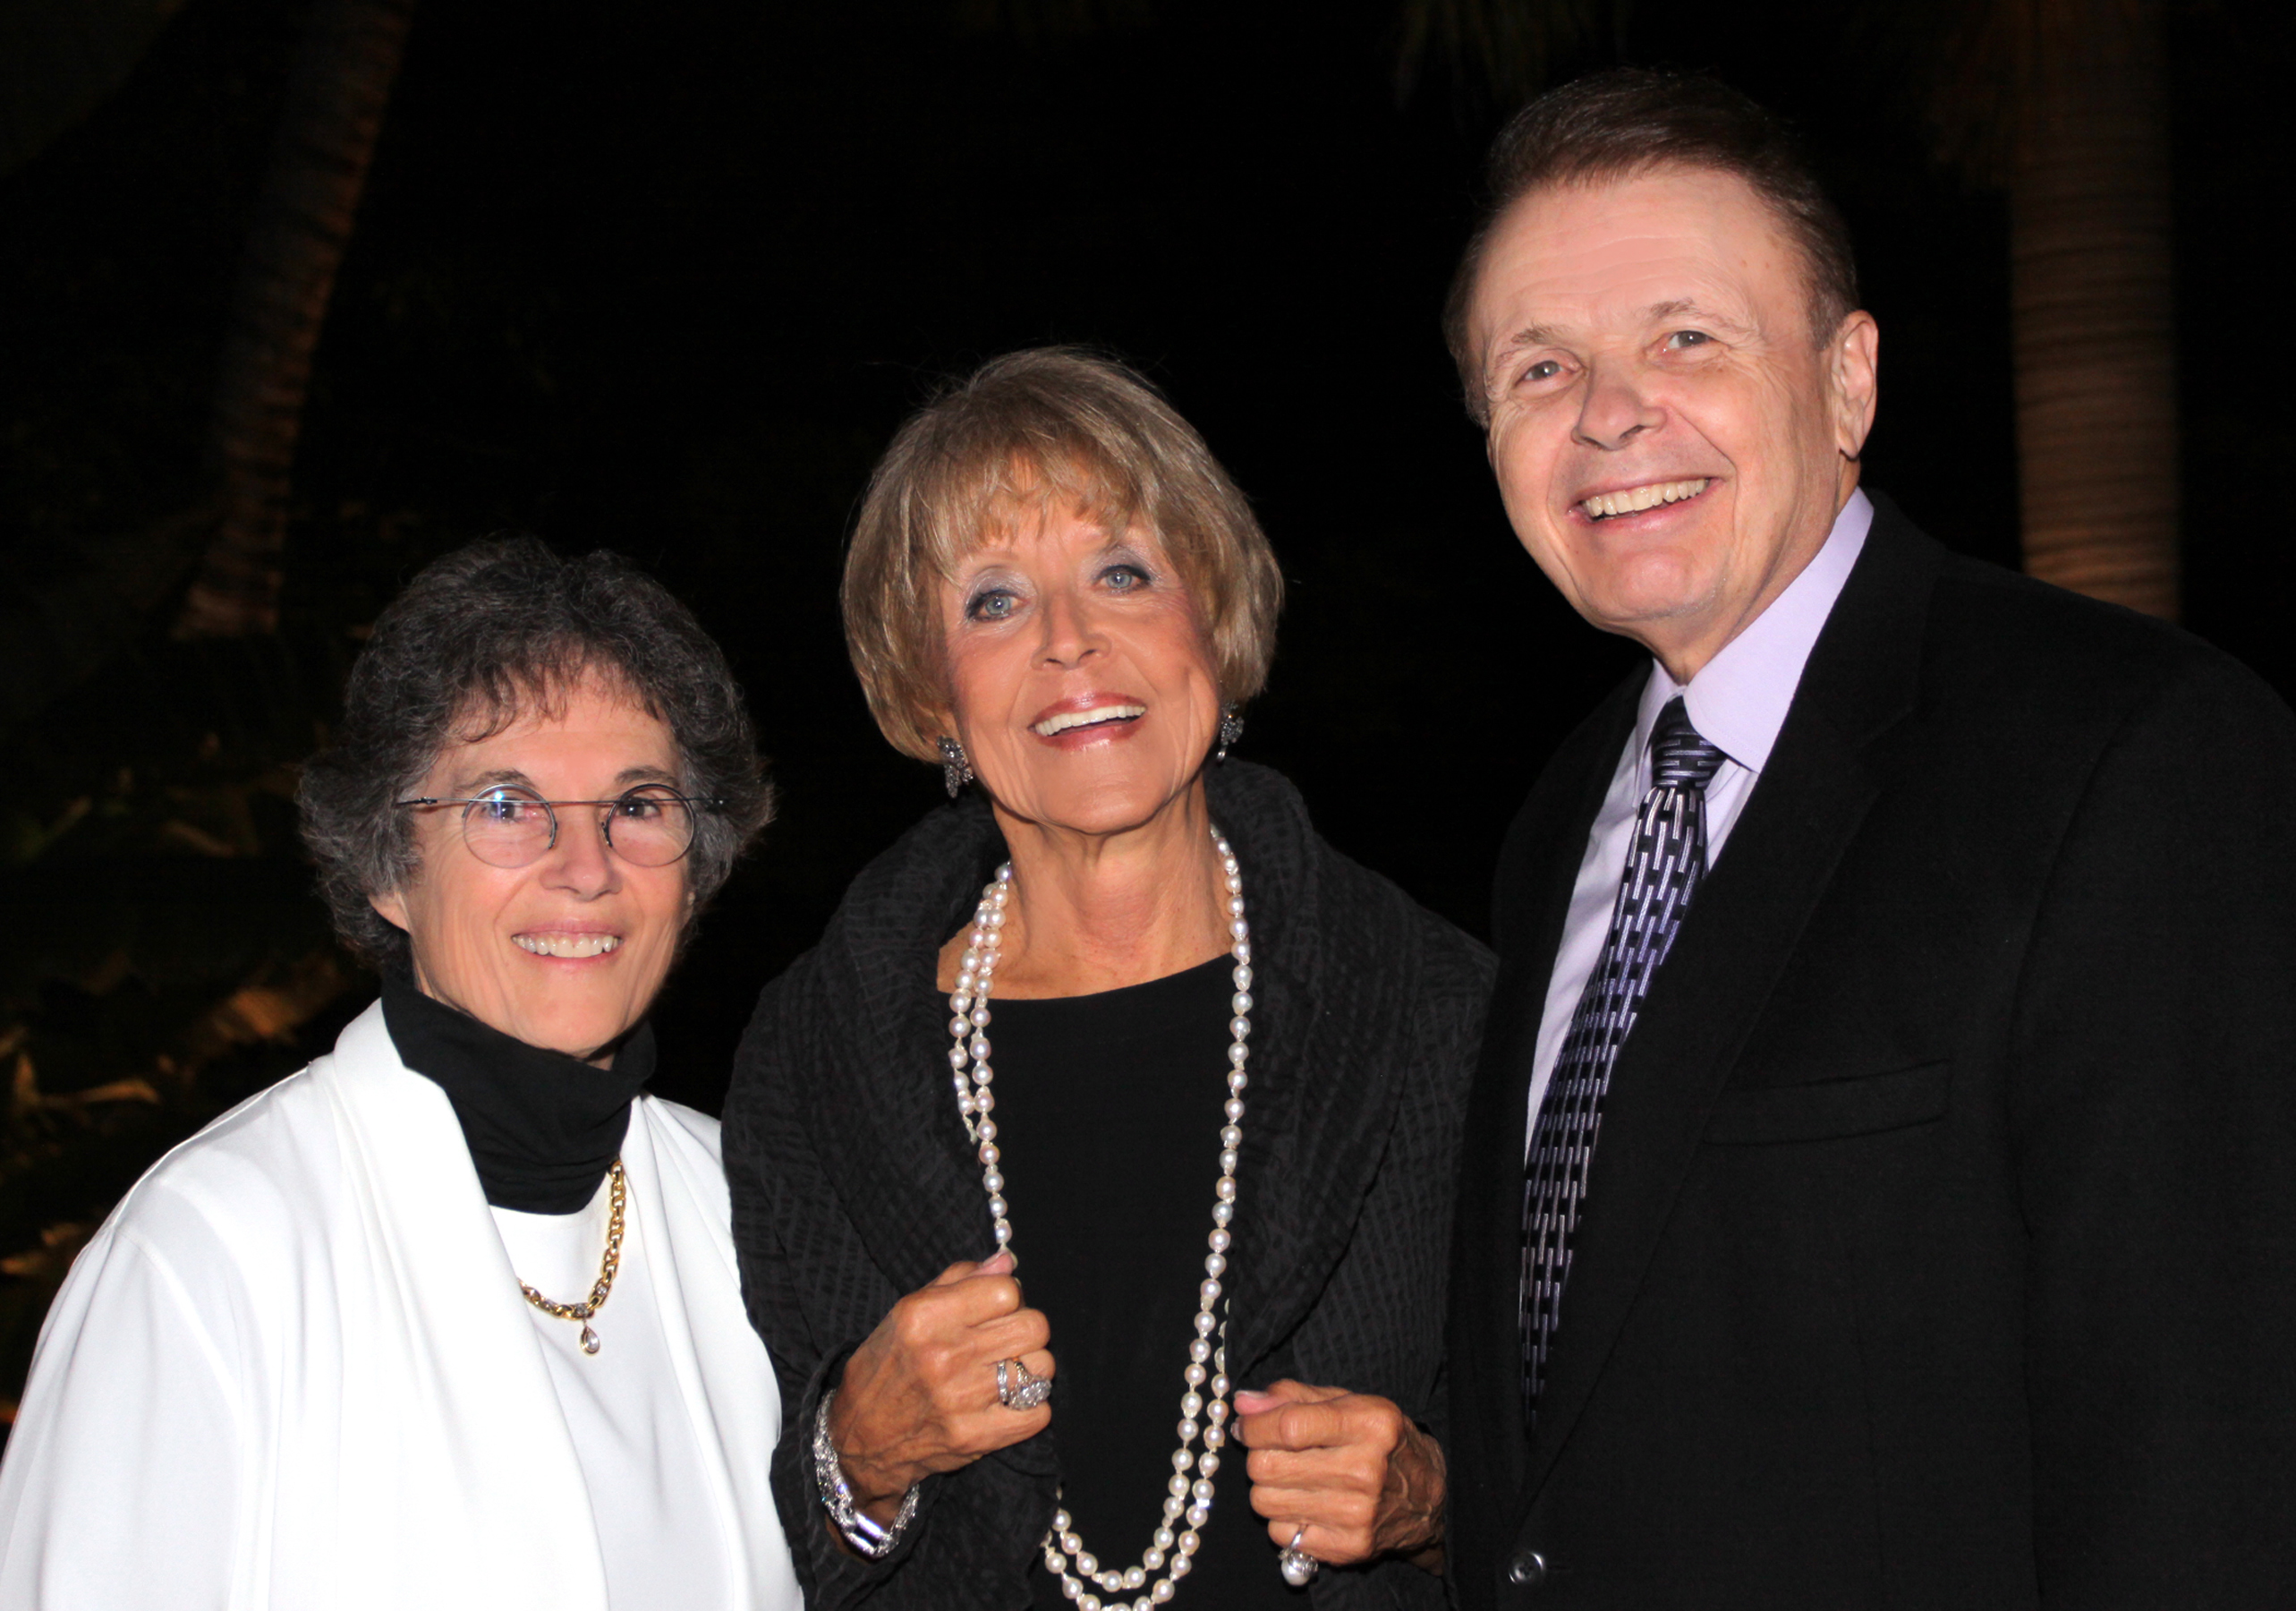 SMOA president Wendy Surkis, SMOA board member and Ringling College trustee Elaine Keating and Ringling College president Dr. Larry R. Thompson  (L-R)